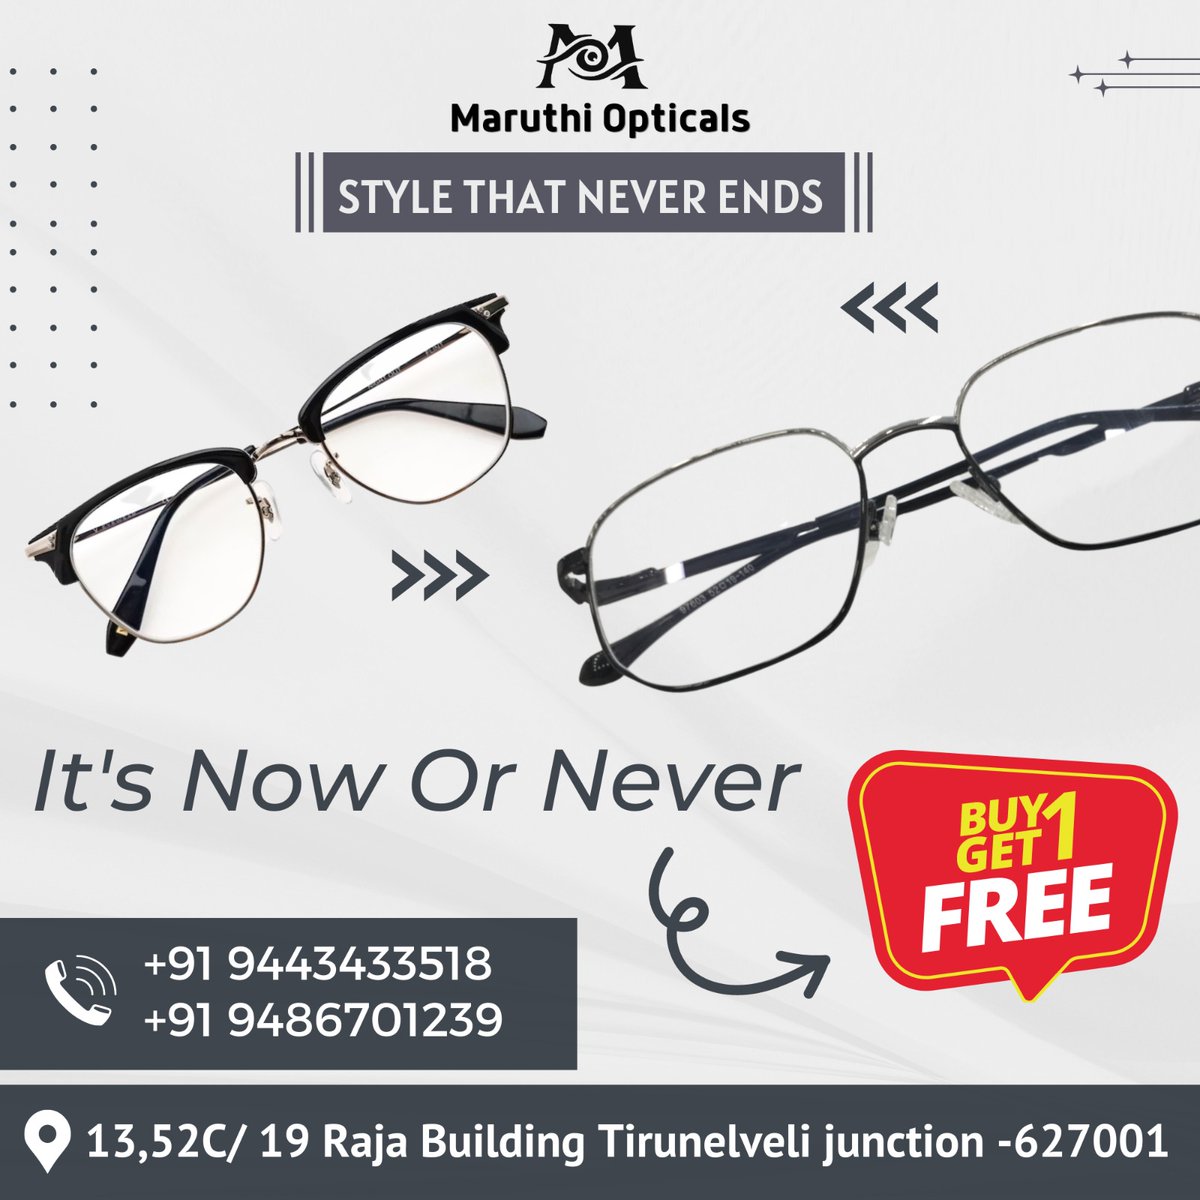 STYLE THAT NEVER ENDS
.
Buy 1 Get 1 Free
.
it's Now Or Never
.
13,52C/ 19 Raja Building Tirunelveli junction -627001
Contact Us :

9486701239
9443433518
.
#Eyeglasses
#OpticalFrames
#VisionCare
#GlassesFashion
#EyewearDeals
#Buy1Get1Free
#EyeglassSale
#ClearVision
#OpticalStyle